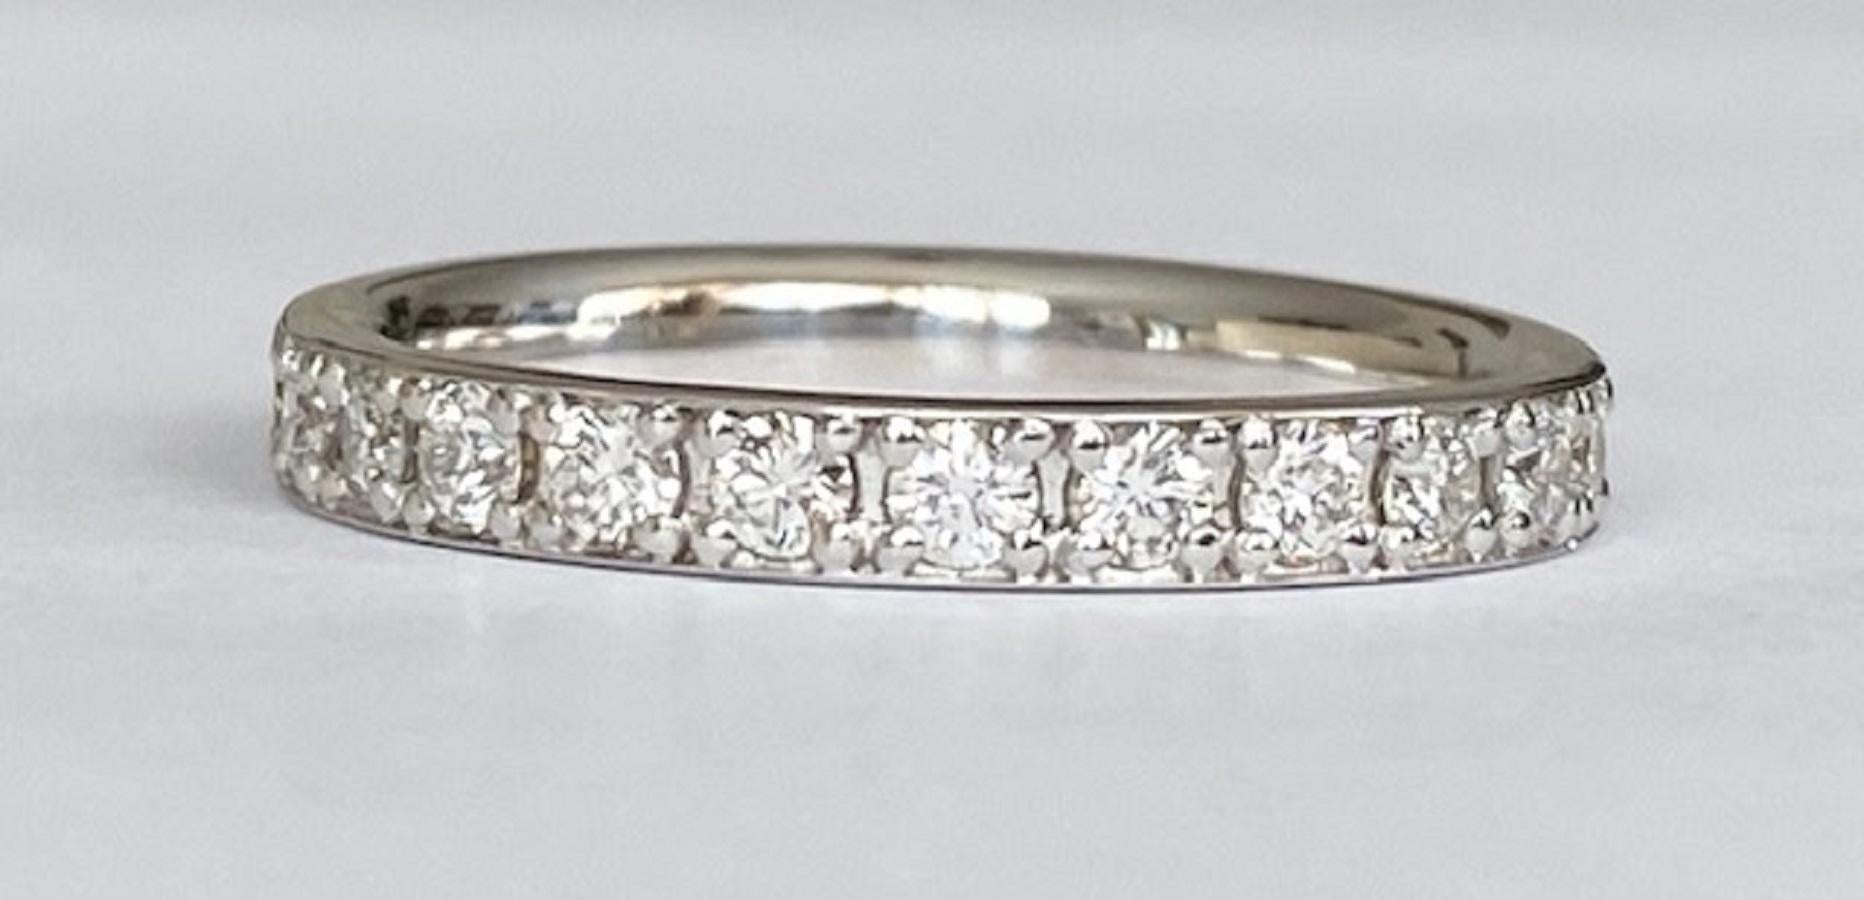 On offer is an 18 karat white gold eternity ring with a total of approx. 0.96 ct of brilliant cut diamonds divided among 24 stones at 0.04 ct each of G/VS quality.
Grade: 18 kt (marked)
Natural diamonds – approx. 0.96 ct G/VS
Weight: 2.8 grams
Ring